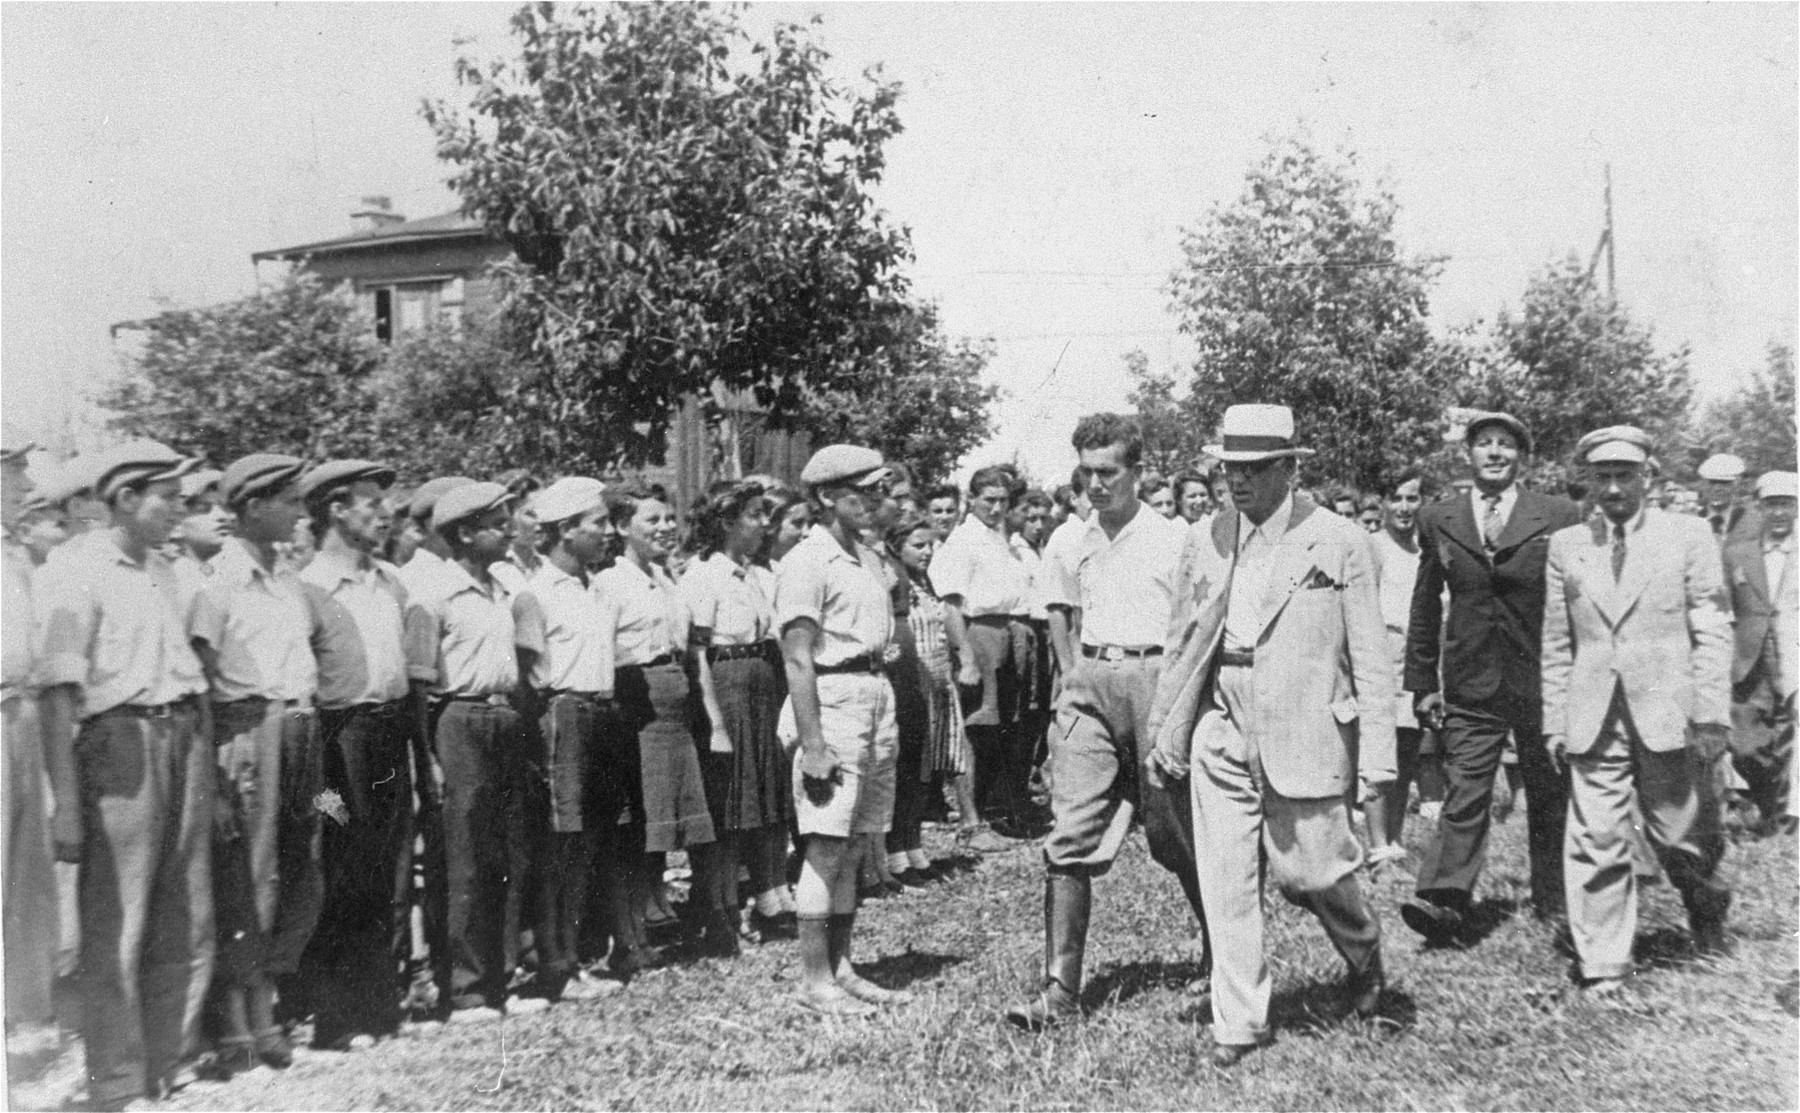 Mordechai Chaim Rumkowski, head of the Lodz ghetto Jewish council, and Leon Rosenblat, head of the Jewish police, review a group of Jewish youth during an official visit to the summer camp in the Marysin quarter of the Lodz ghetto.

Among the children pictured is Jakob Budkowski.  He was the son of Majer Szymon  Budkowski and  Szajna Zlata Lesz and was born May 13, 1927 in Lodz. He had three younger brothers; of his family, only Jakob survived.